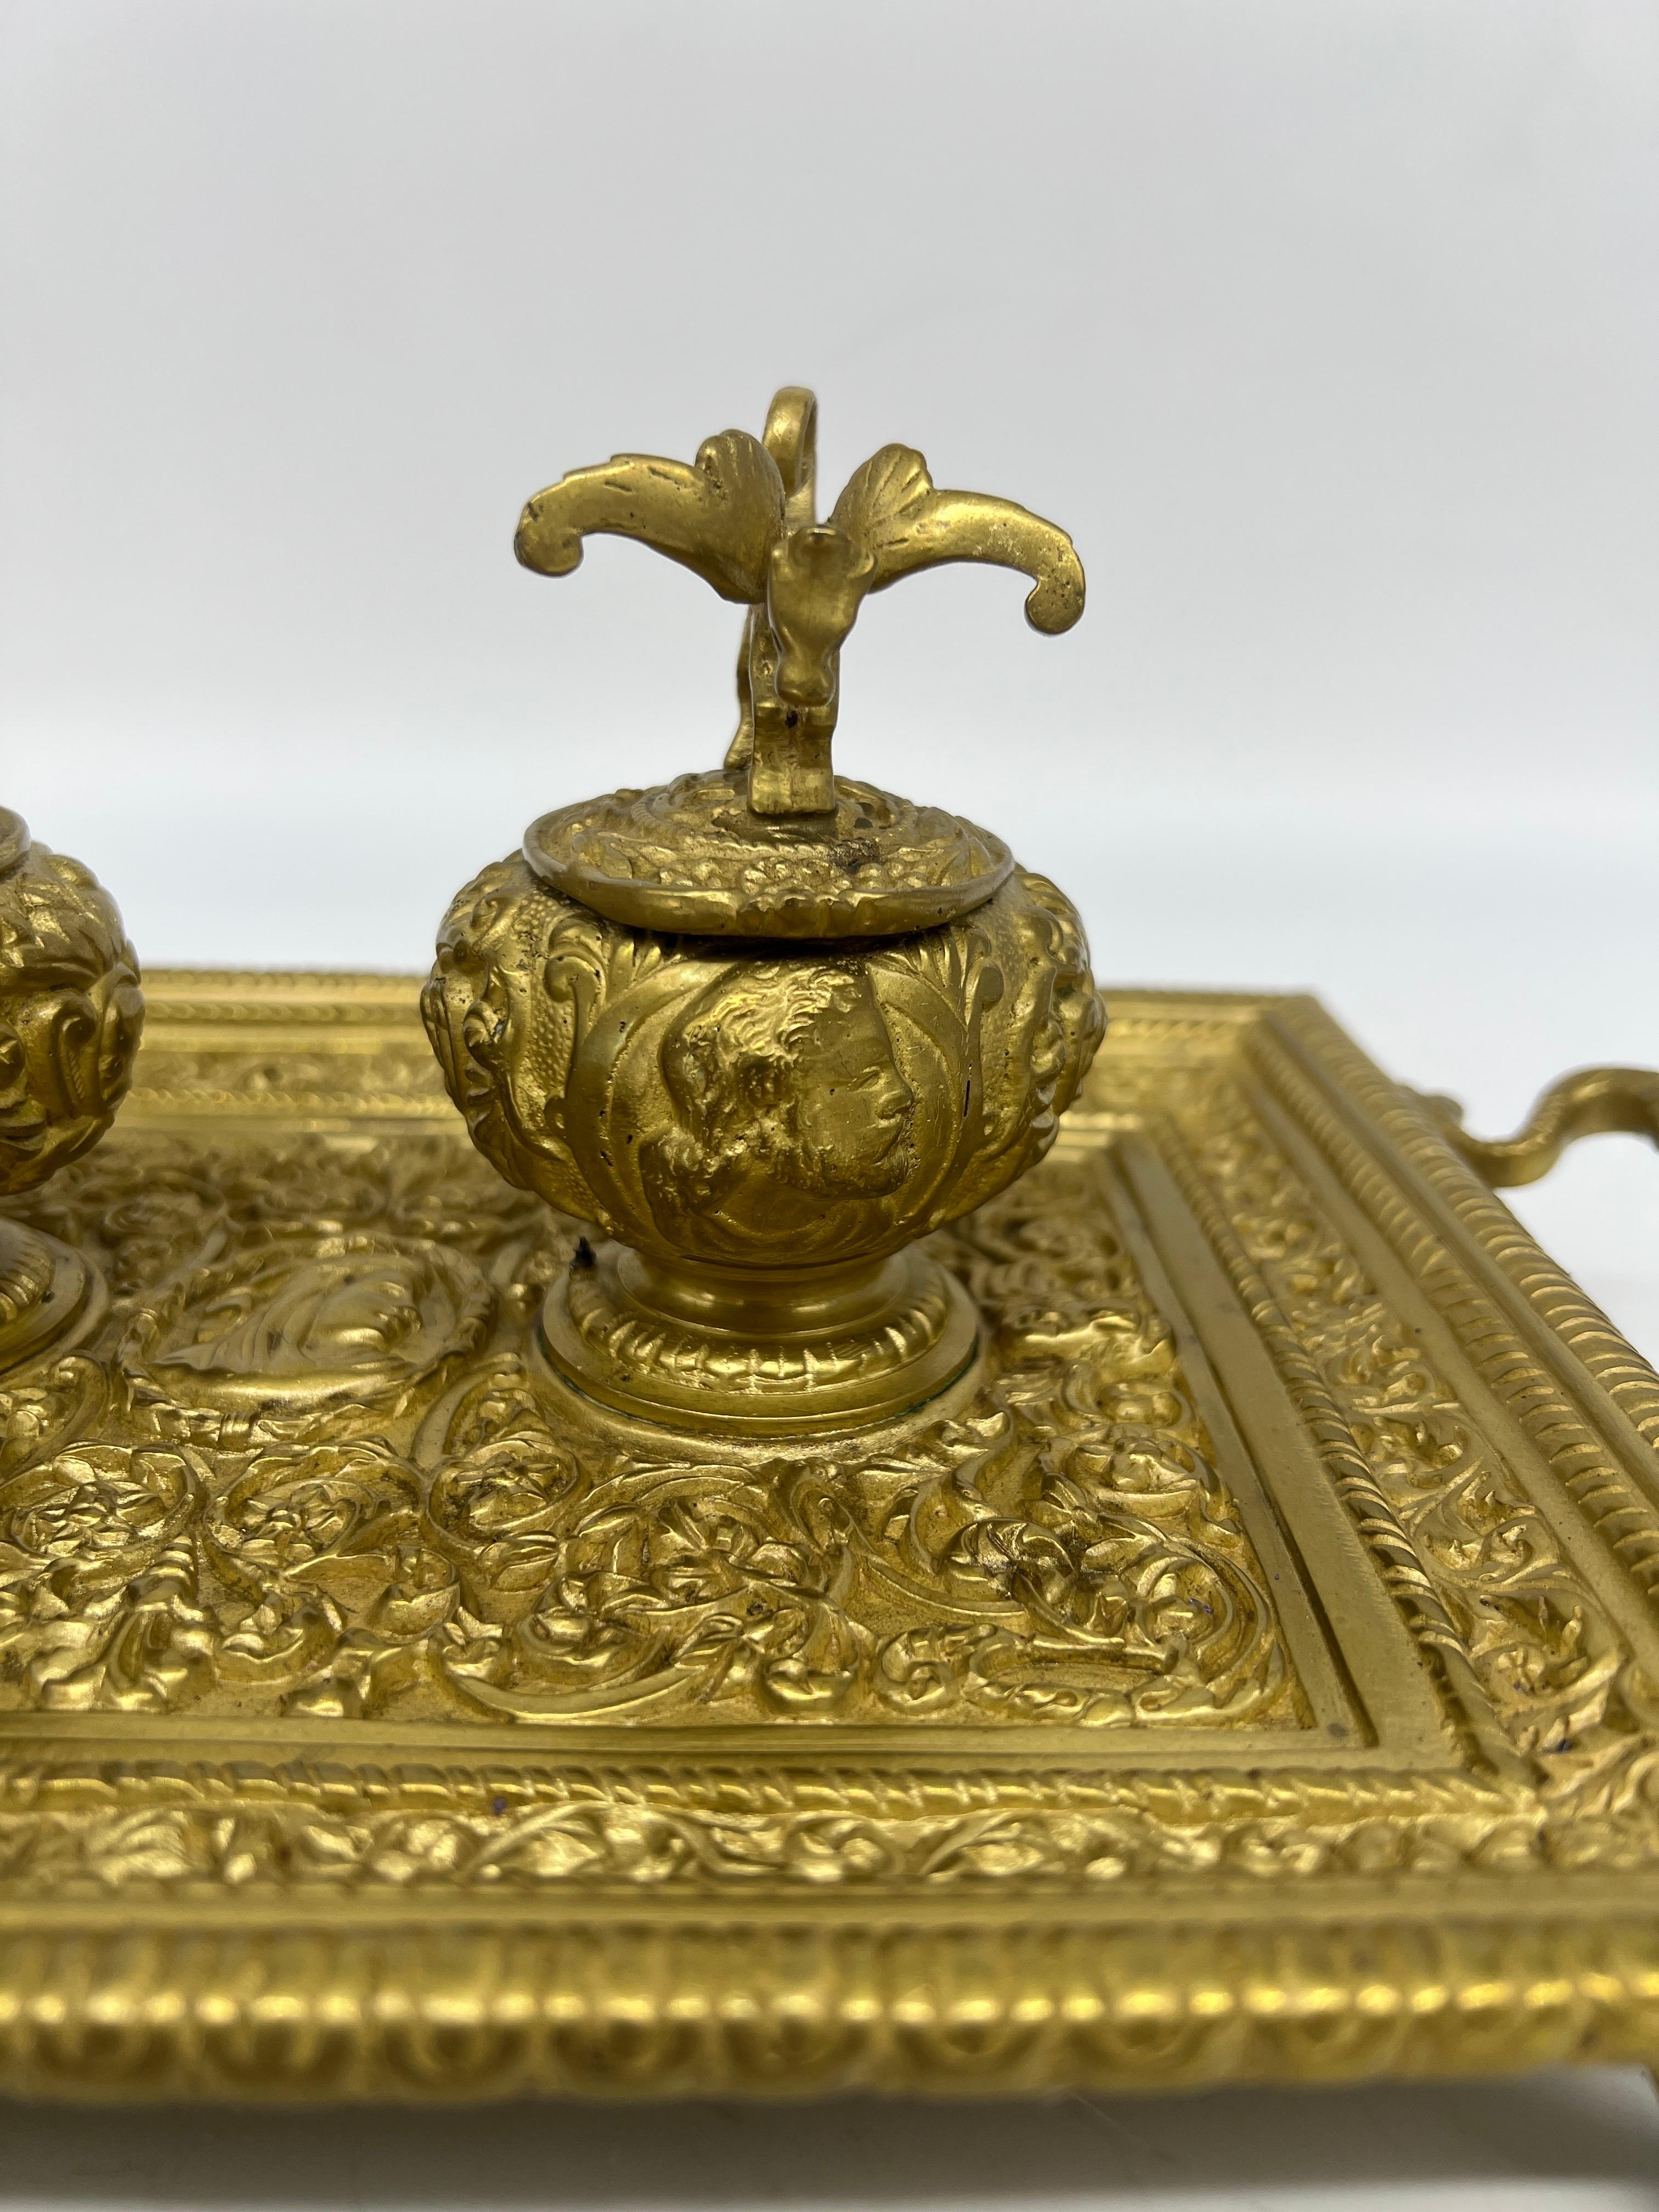 British Emancipation Proclamation Inkstand - 19th Century Heavily Chased Brass For Sale